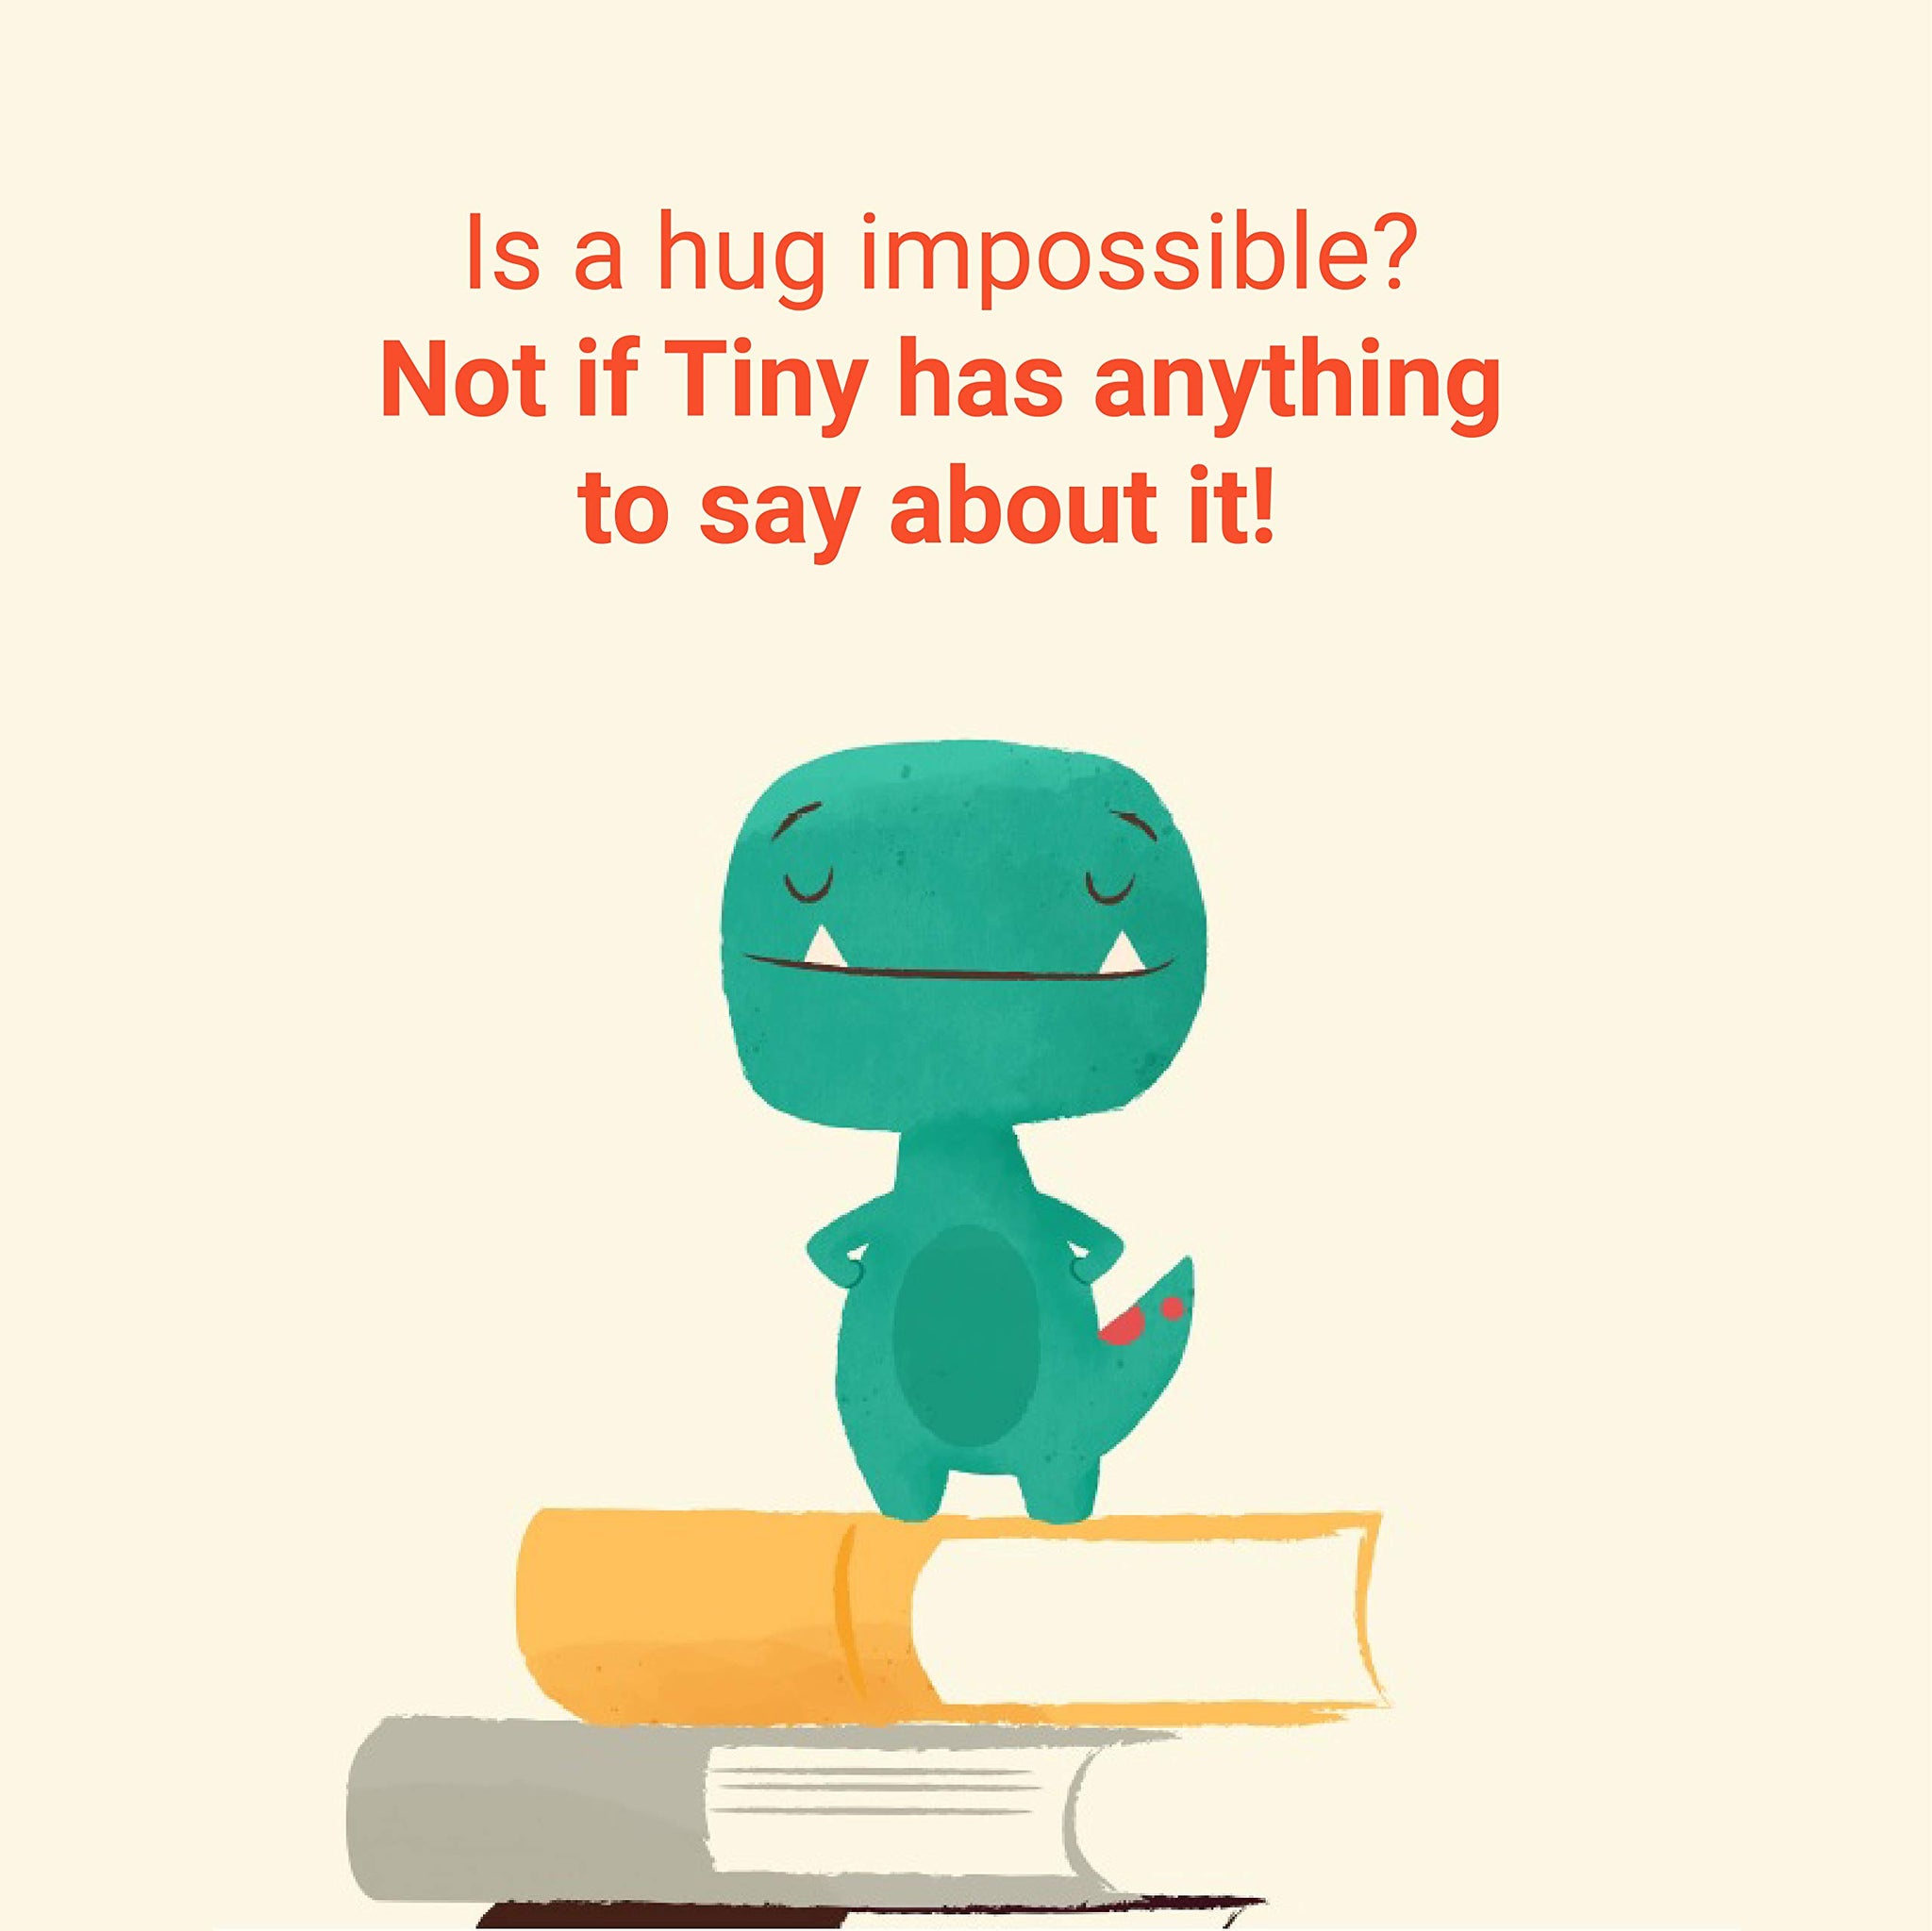 Tiny T.Rex and the Impossible Hug Book